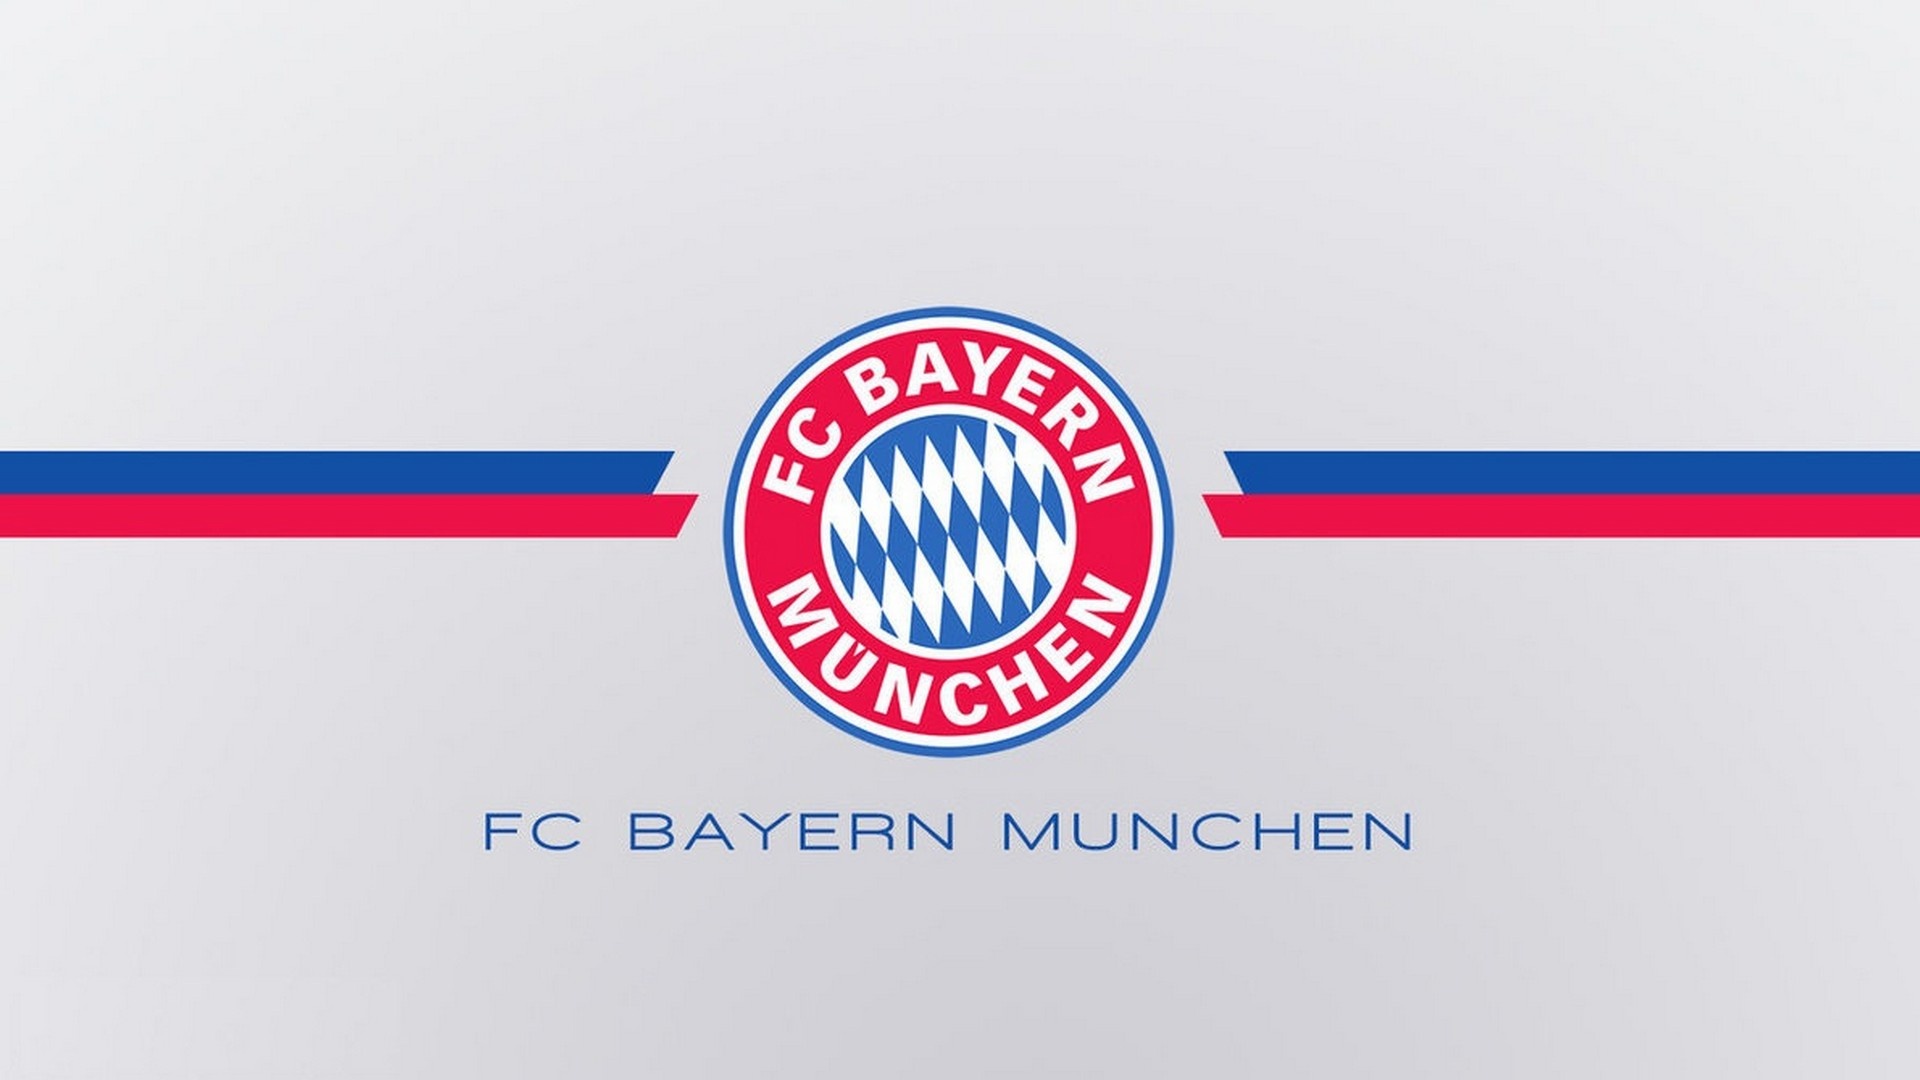 Bayern Munchen FC: Won the most titles in the Bundesliga and in the German Cup. 1920x1080 Full HD Wallpaper.